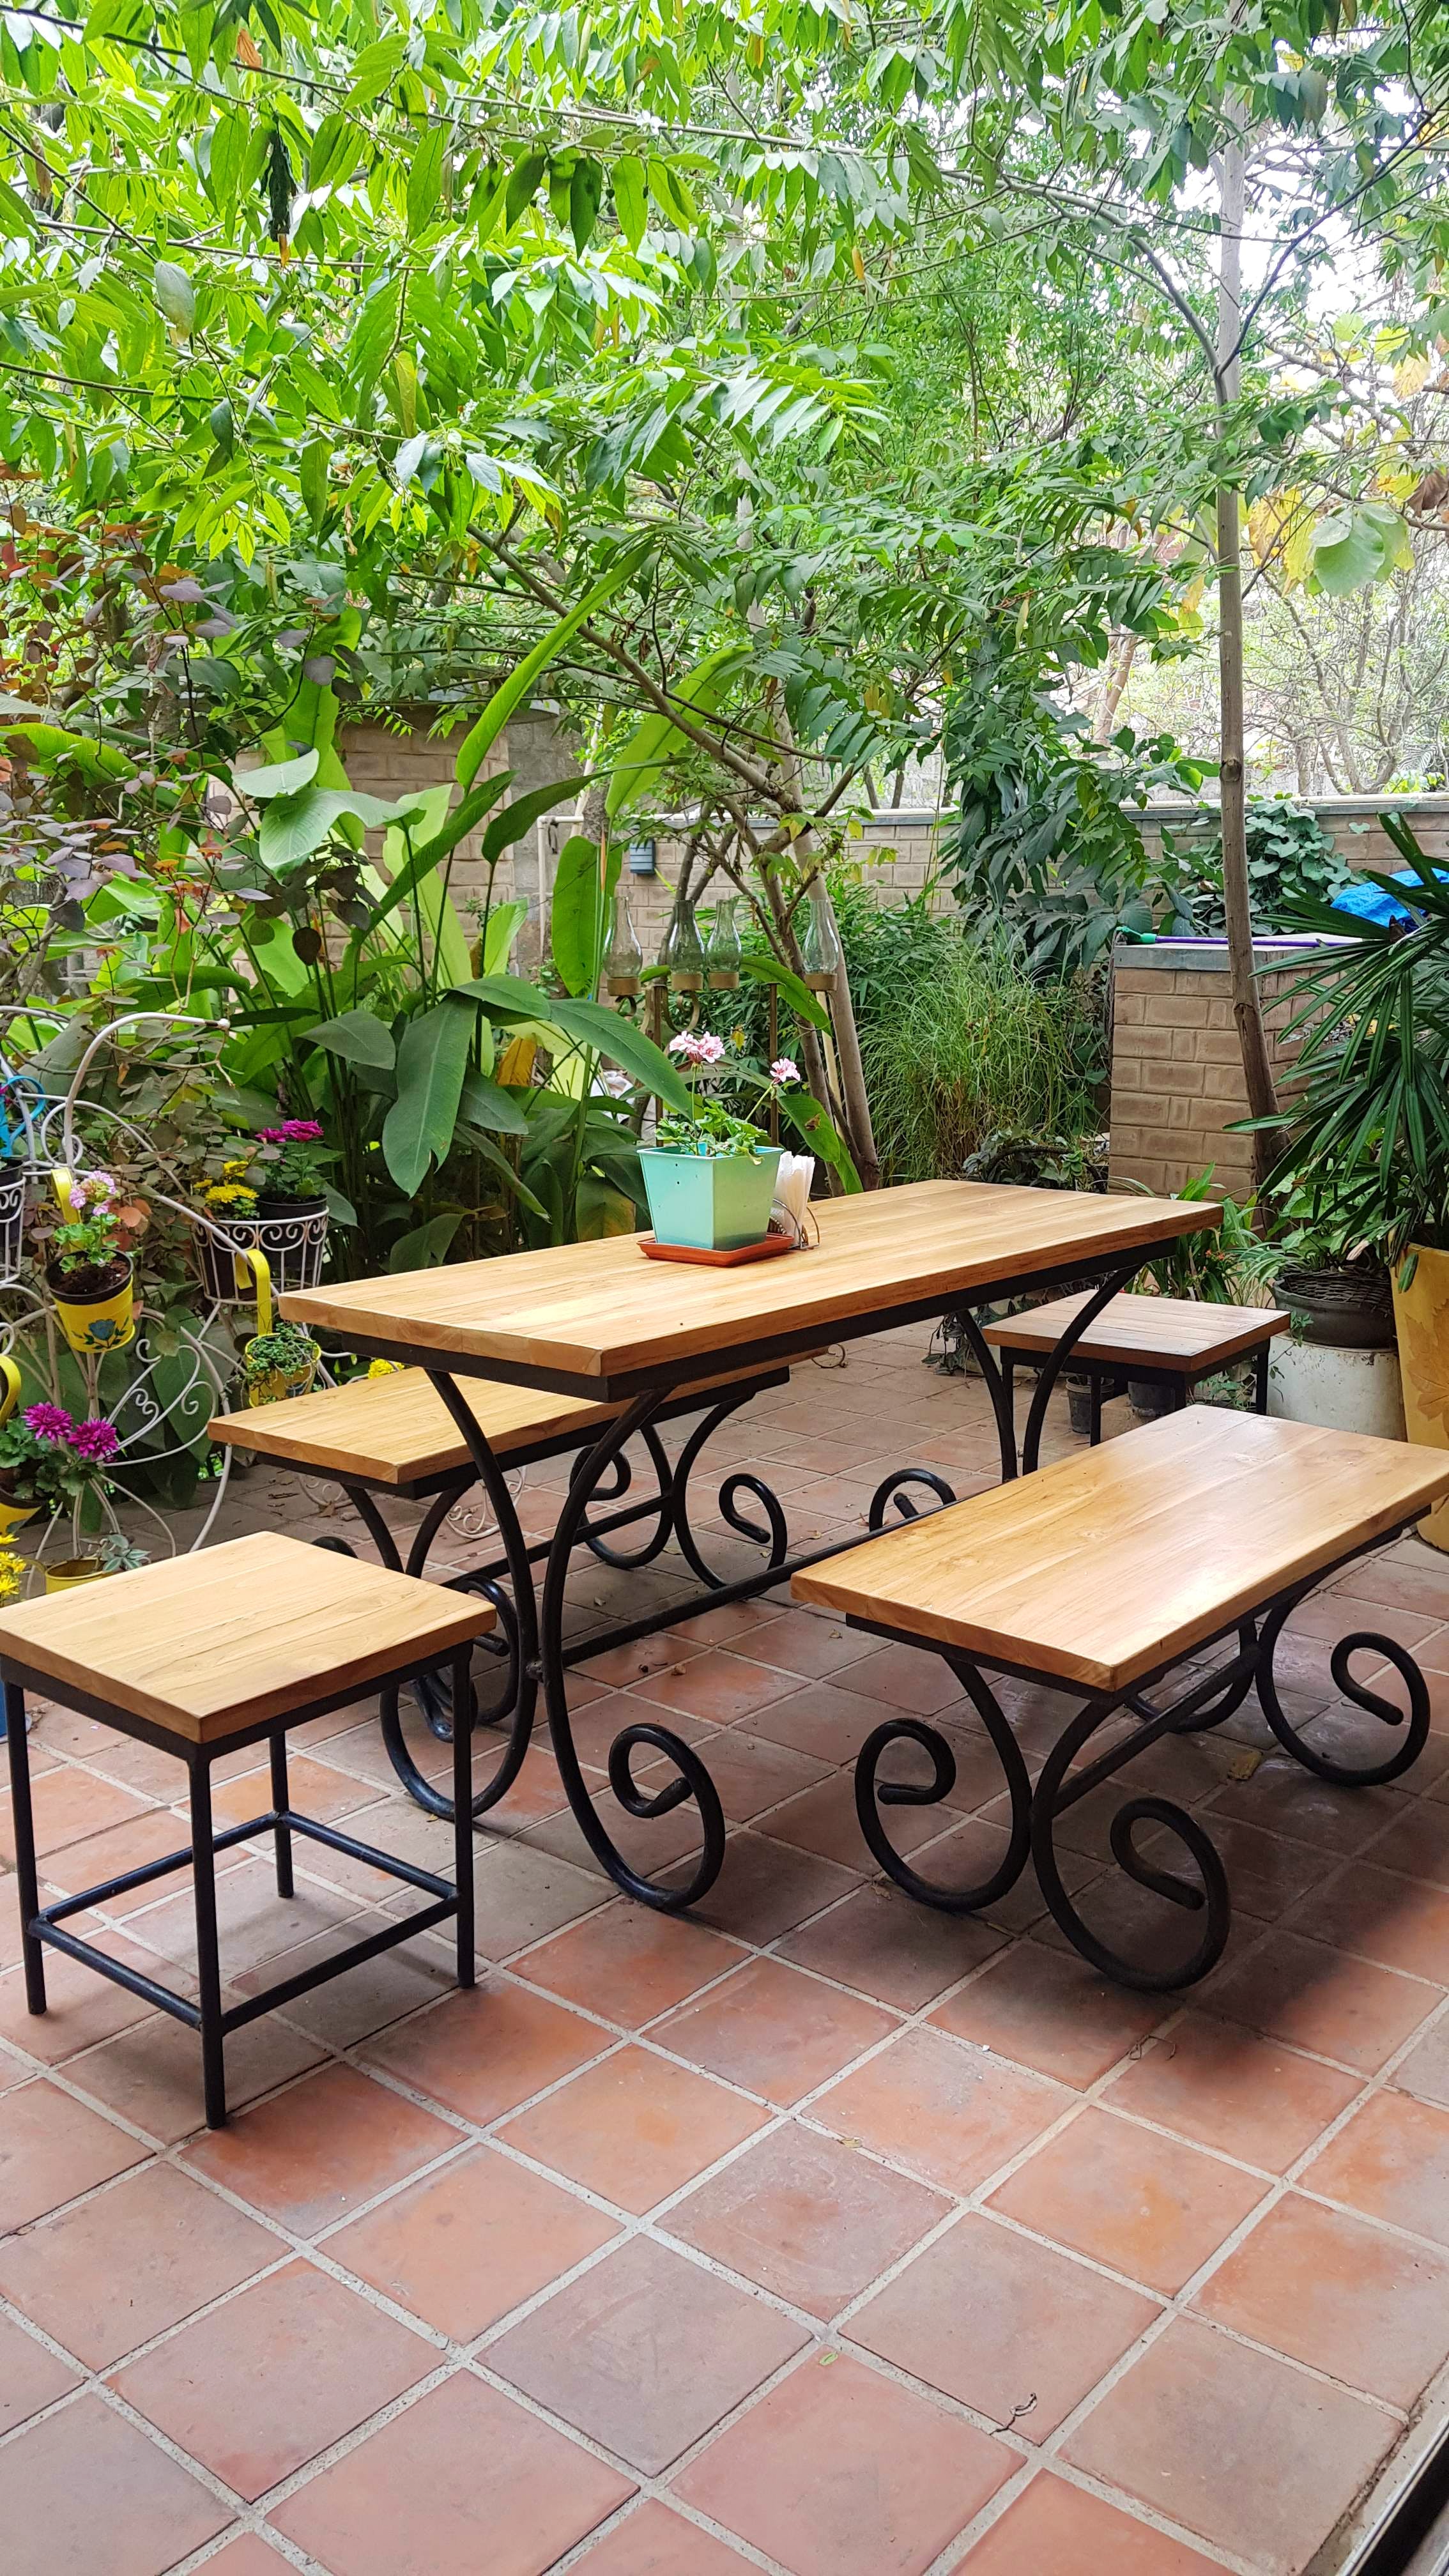 Furniture,Table,Outdoor table,Outdoor furniture,Coffee table,Patio,Iron,Bench,Outdoor bench,Botany